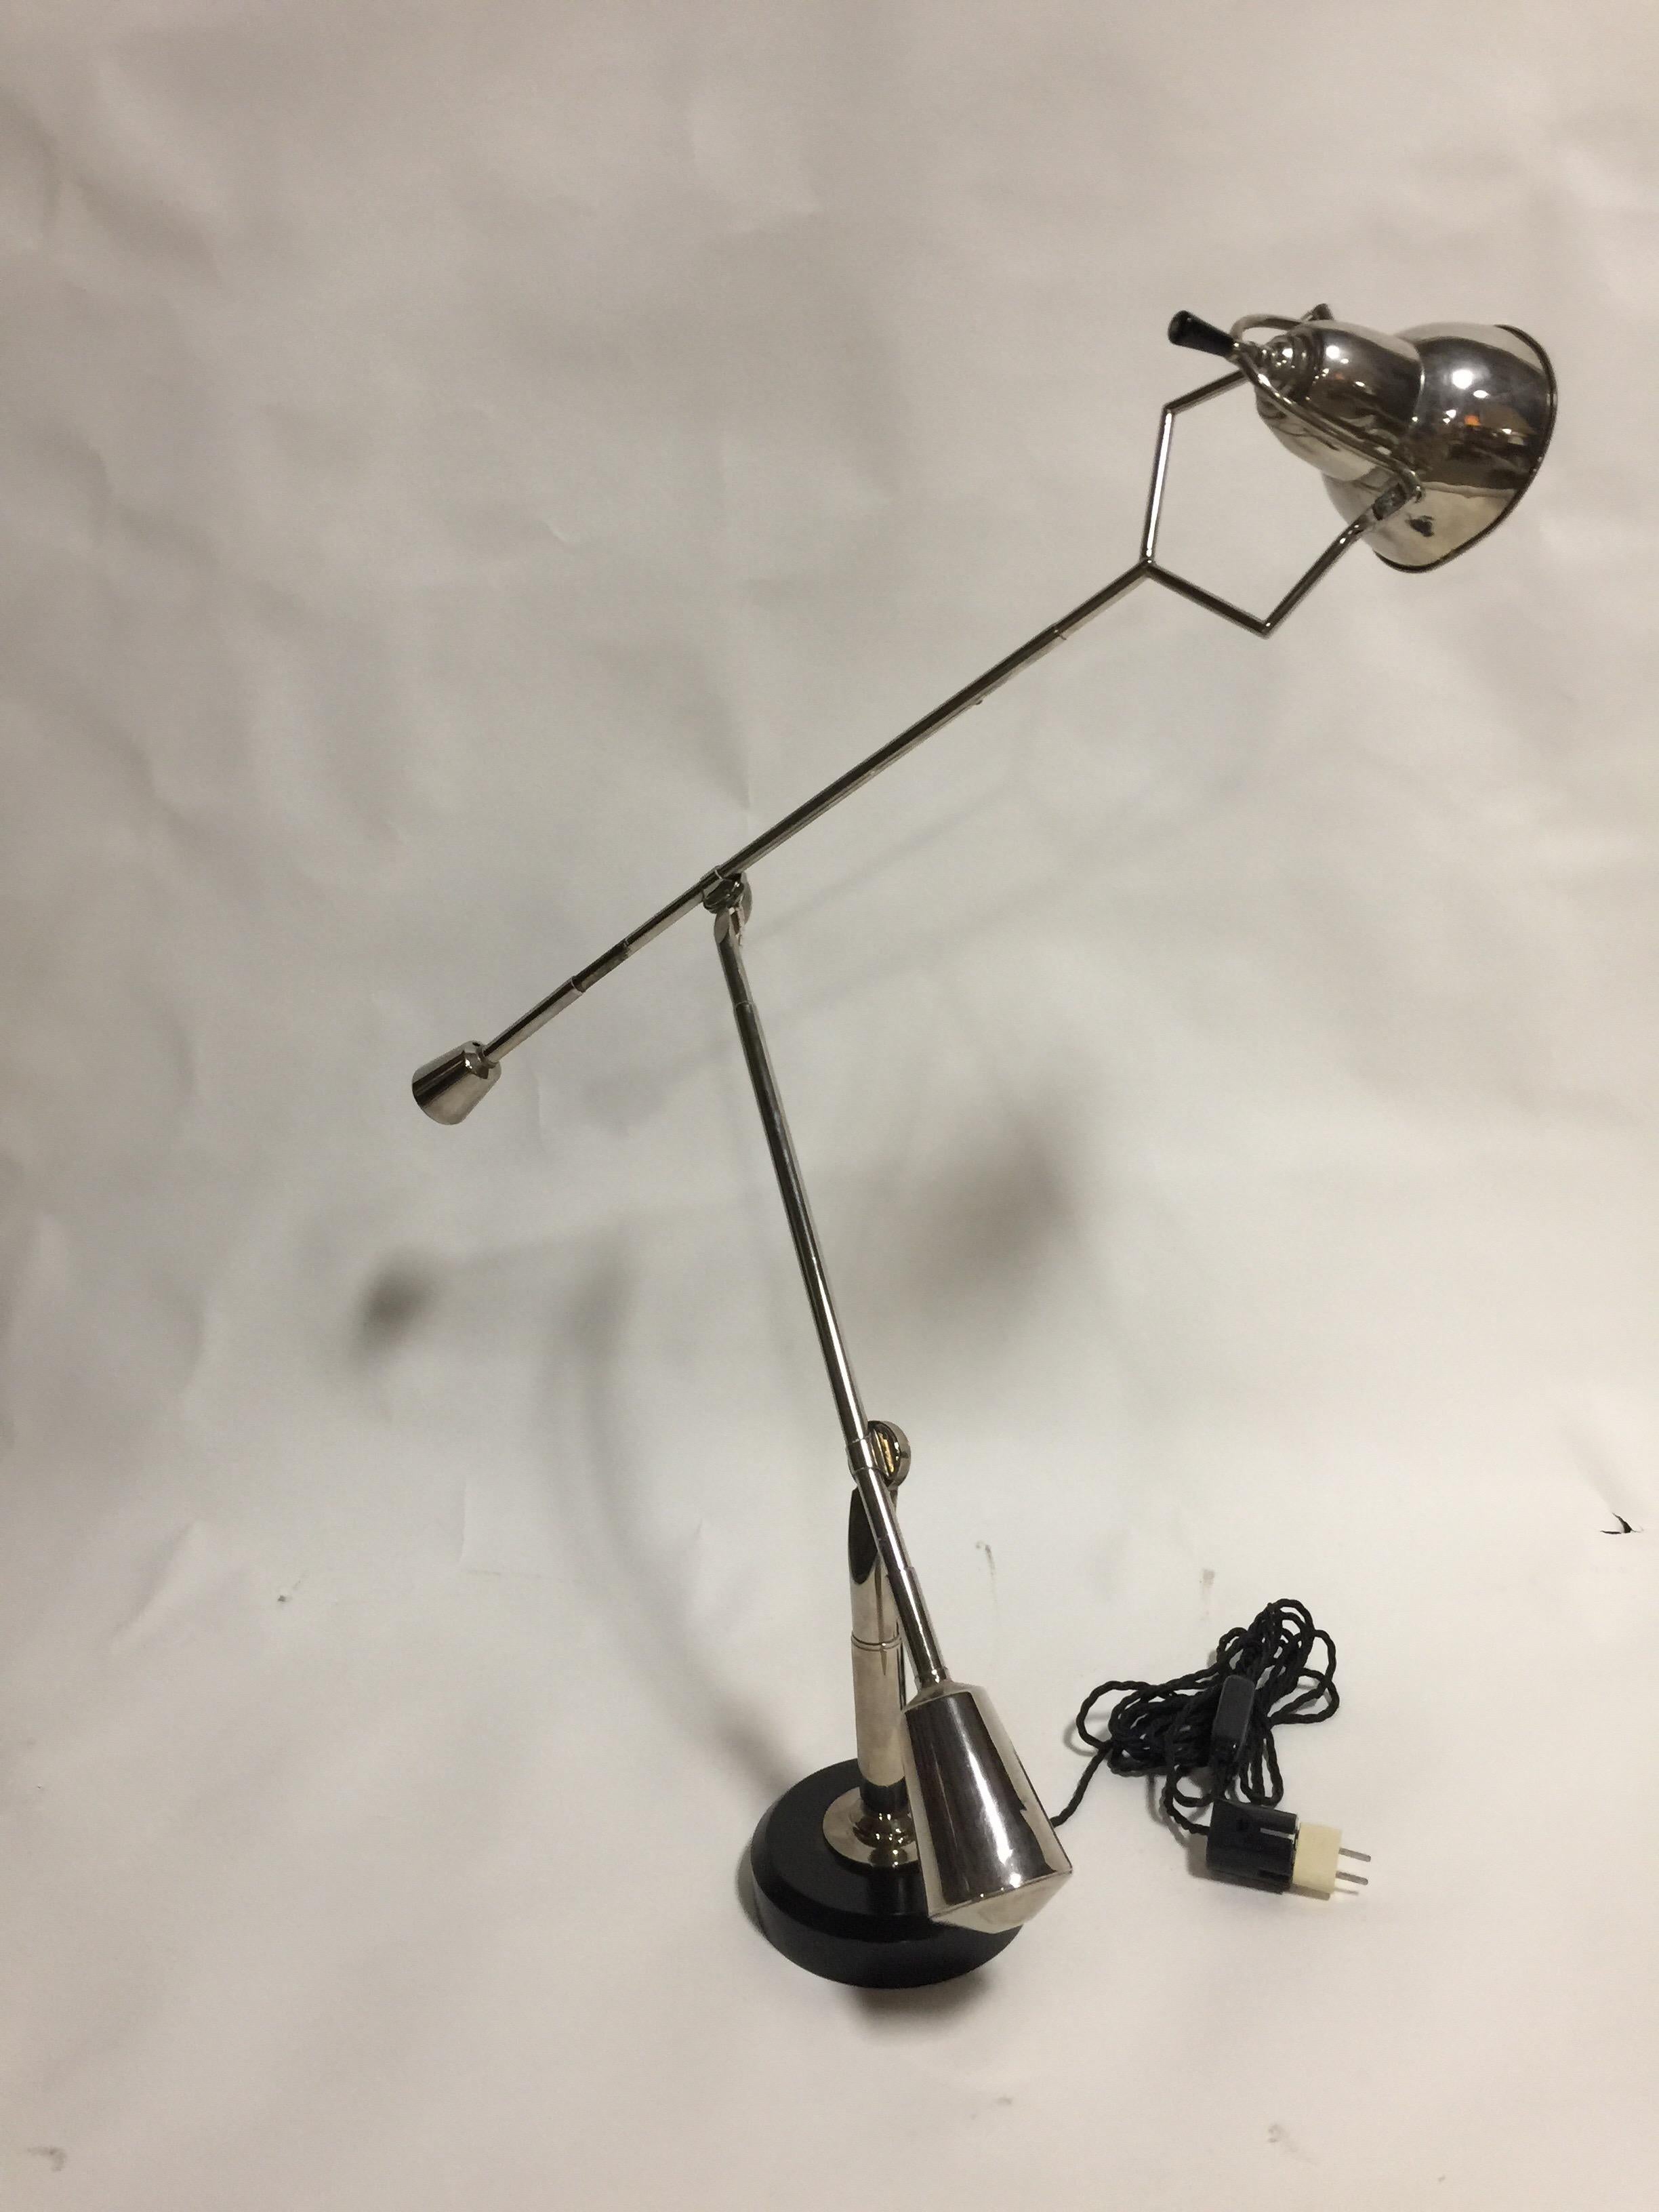 An early desk lamp handmade by Édouard-Wilfred Buquet. France, 1927. Nickel-plated brass arms with an aluminum shade, resting on a round ebonized and lacquered wood base.

Features original European silk-covered cord, wiring and plug; includes plug